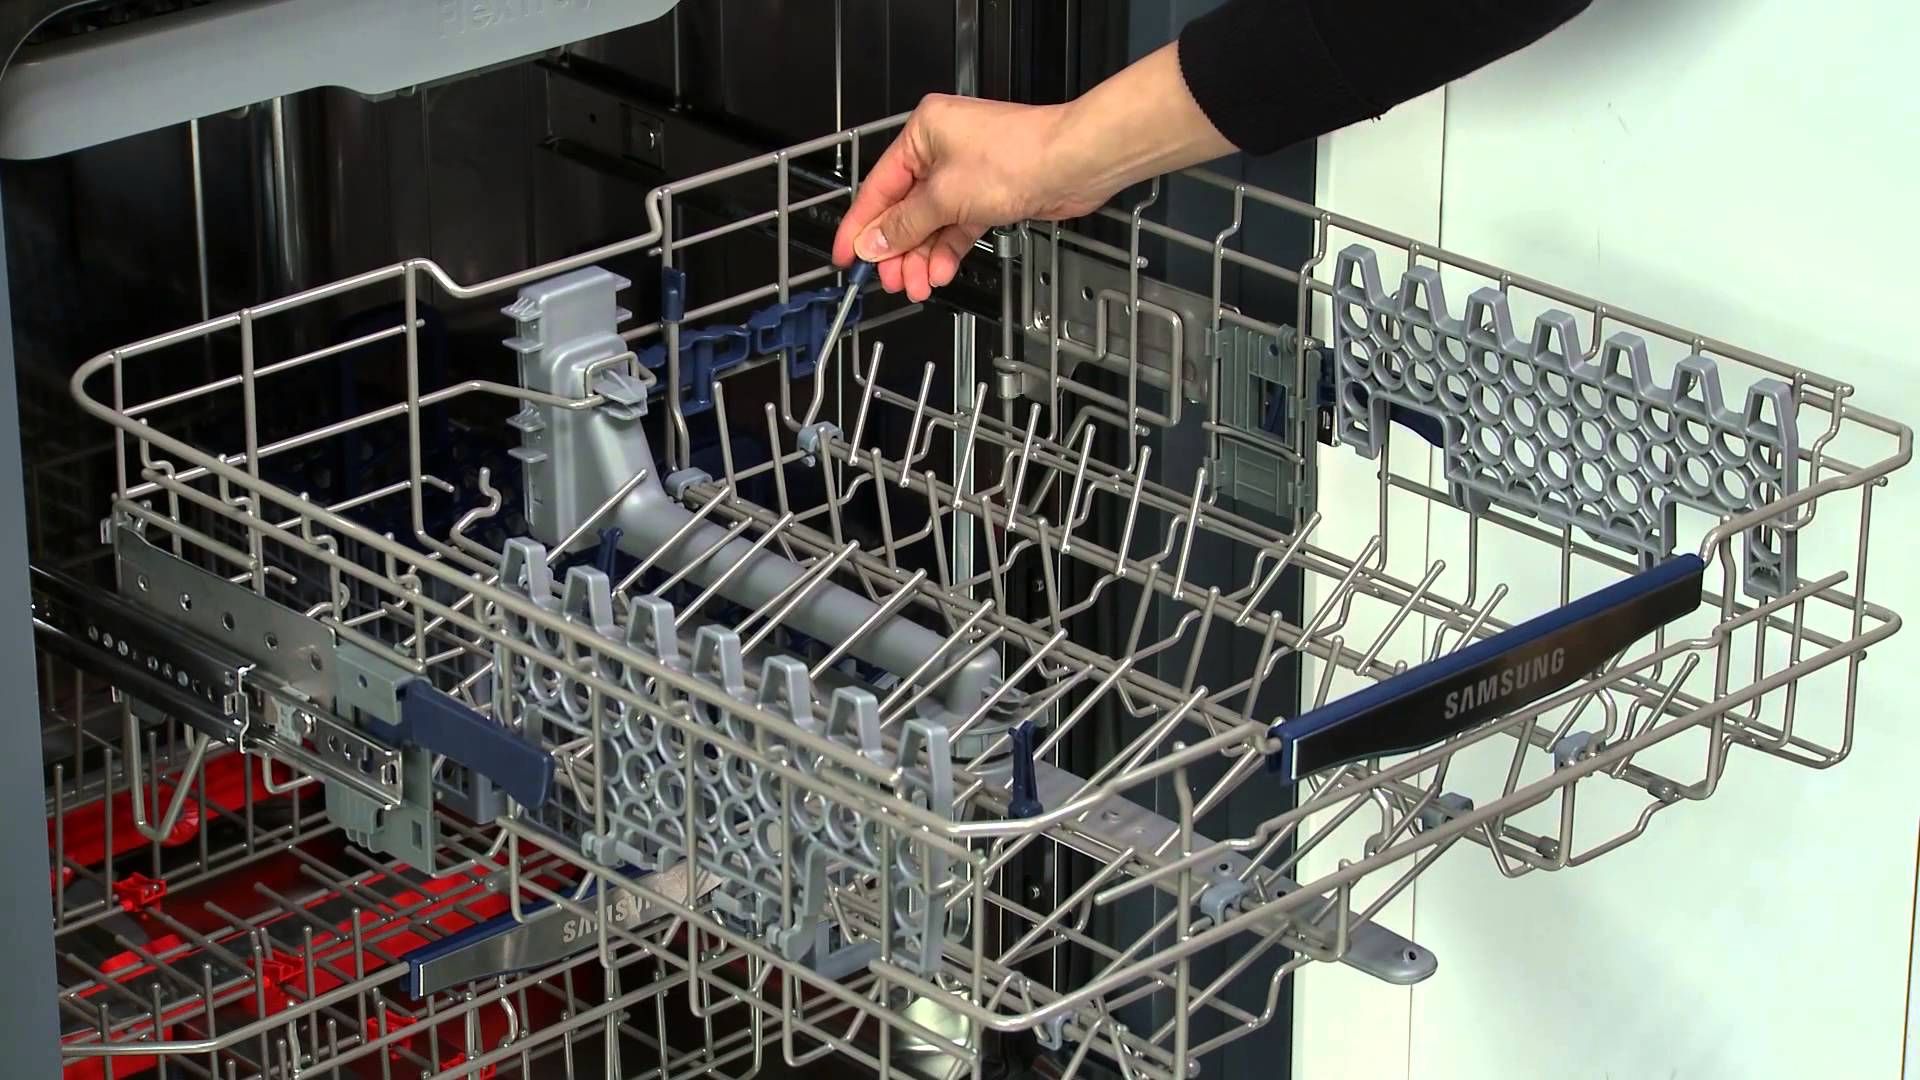 How To Install A Samsung Dishwasher